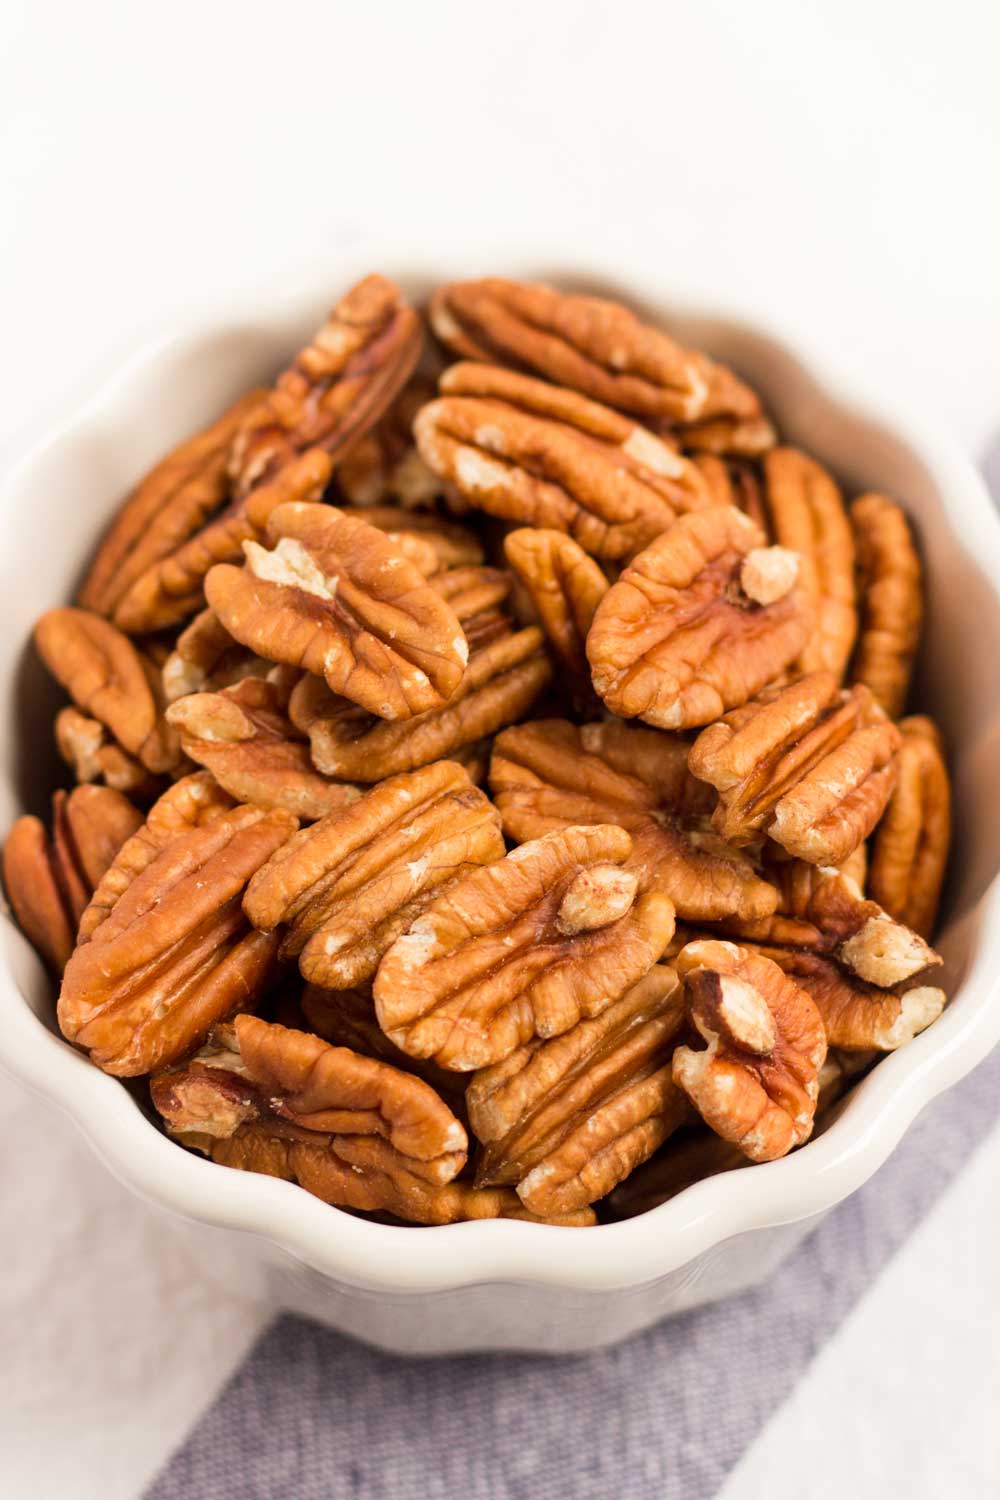 Main ingredient for Candied Pecan recipe.